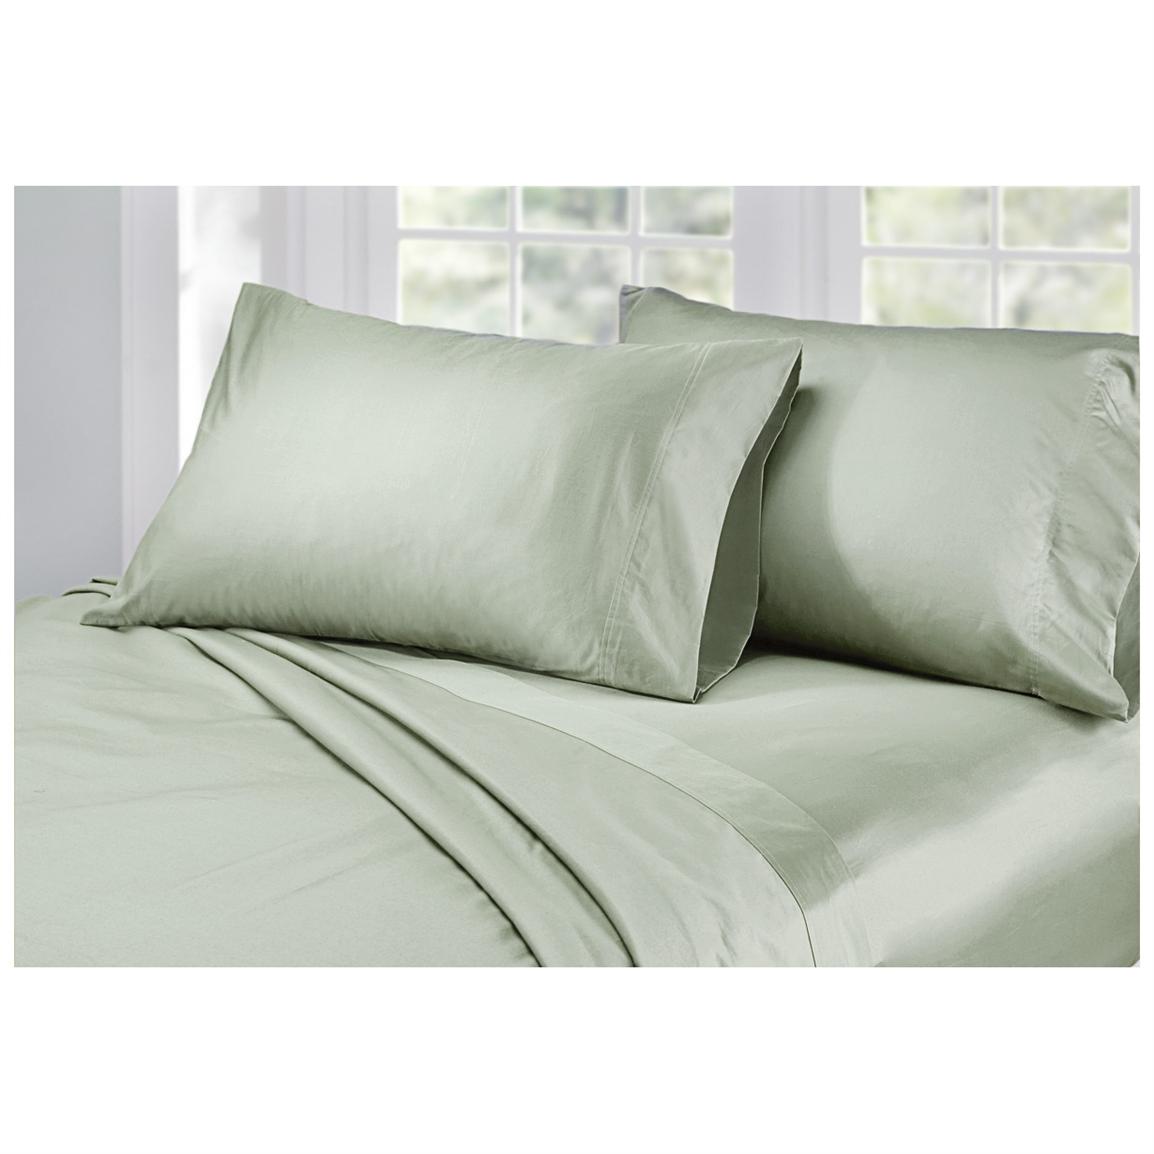 600 Thread Count Woven Egyptian Cotton Queen Size Sheet Set 589950 Sheets At Sportsmans Guide